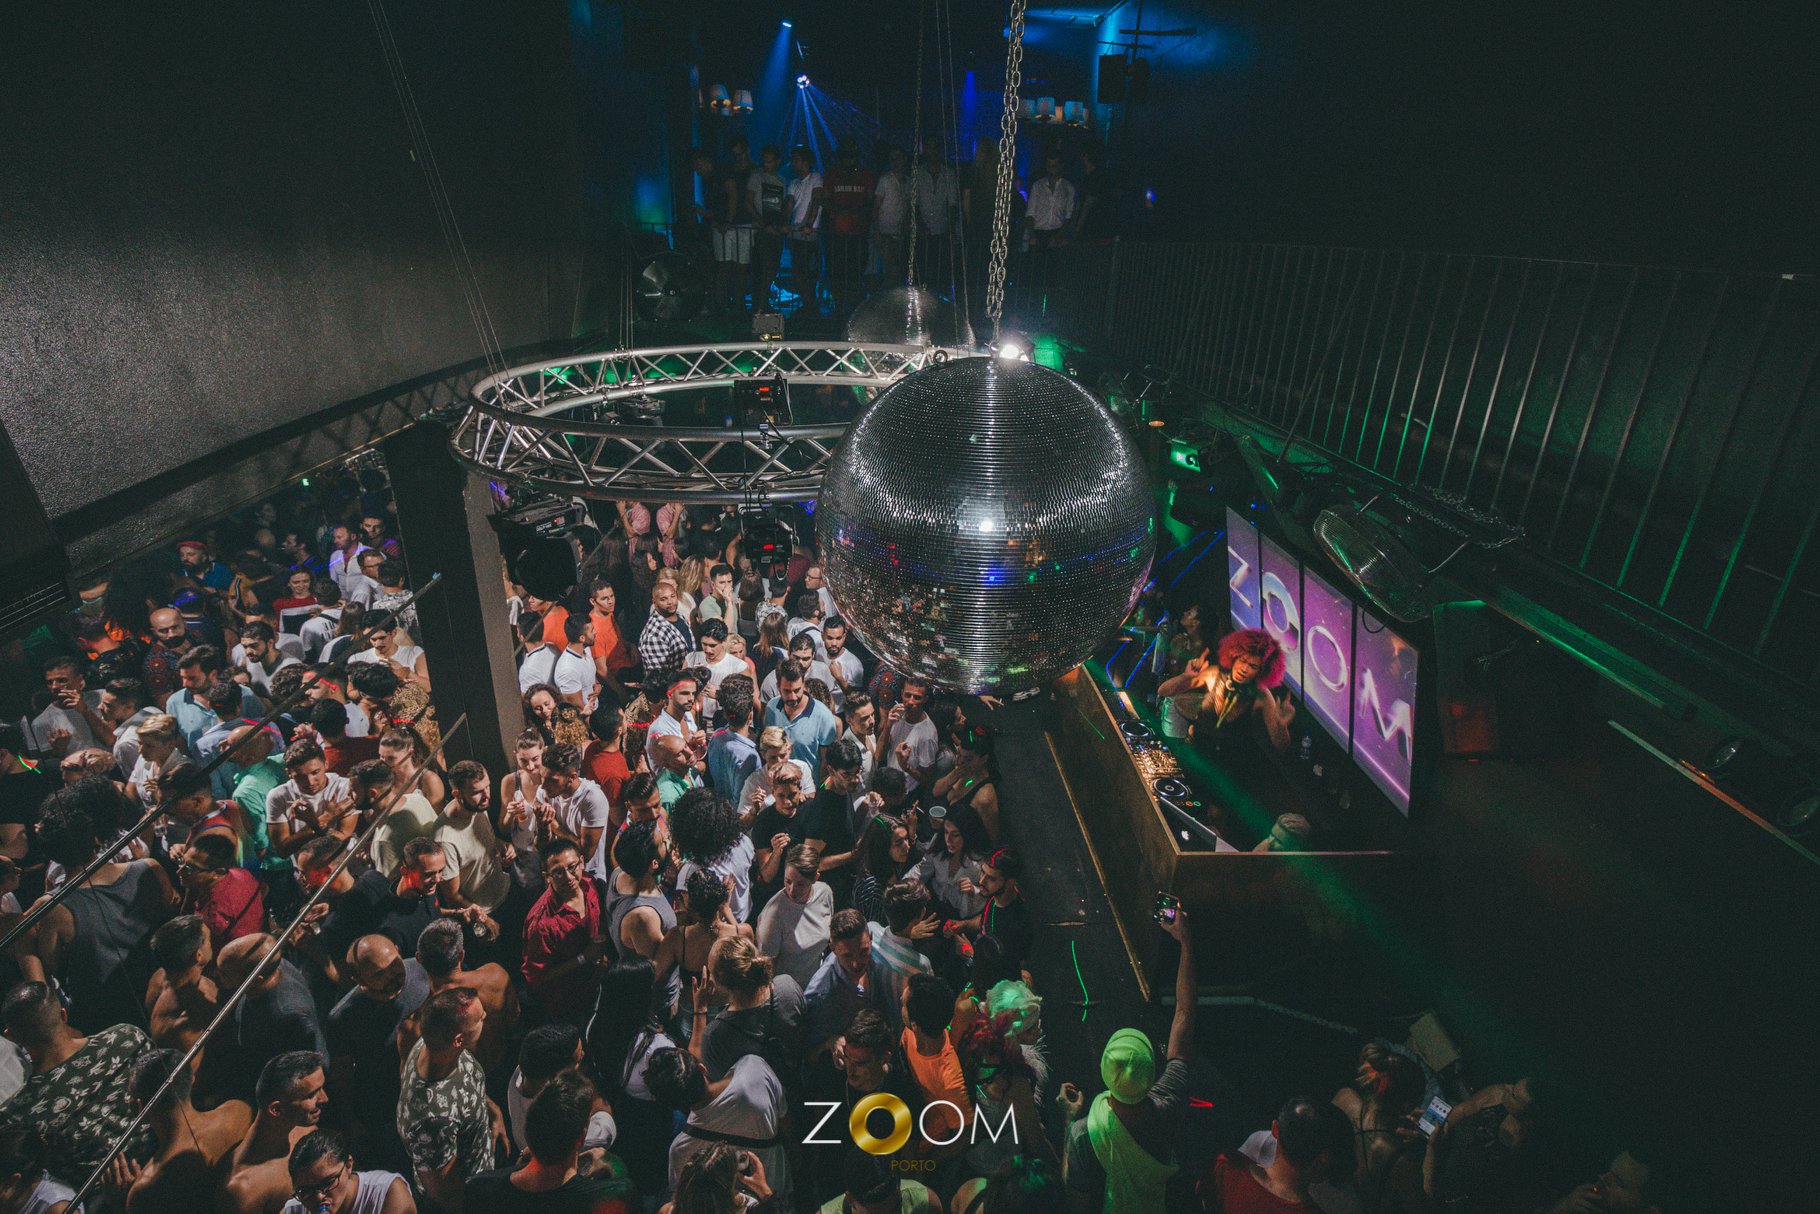 Crowd of people dancing at Zoom Club, Porto, Portugal